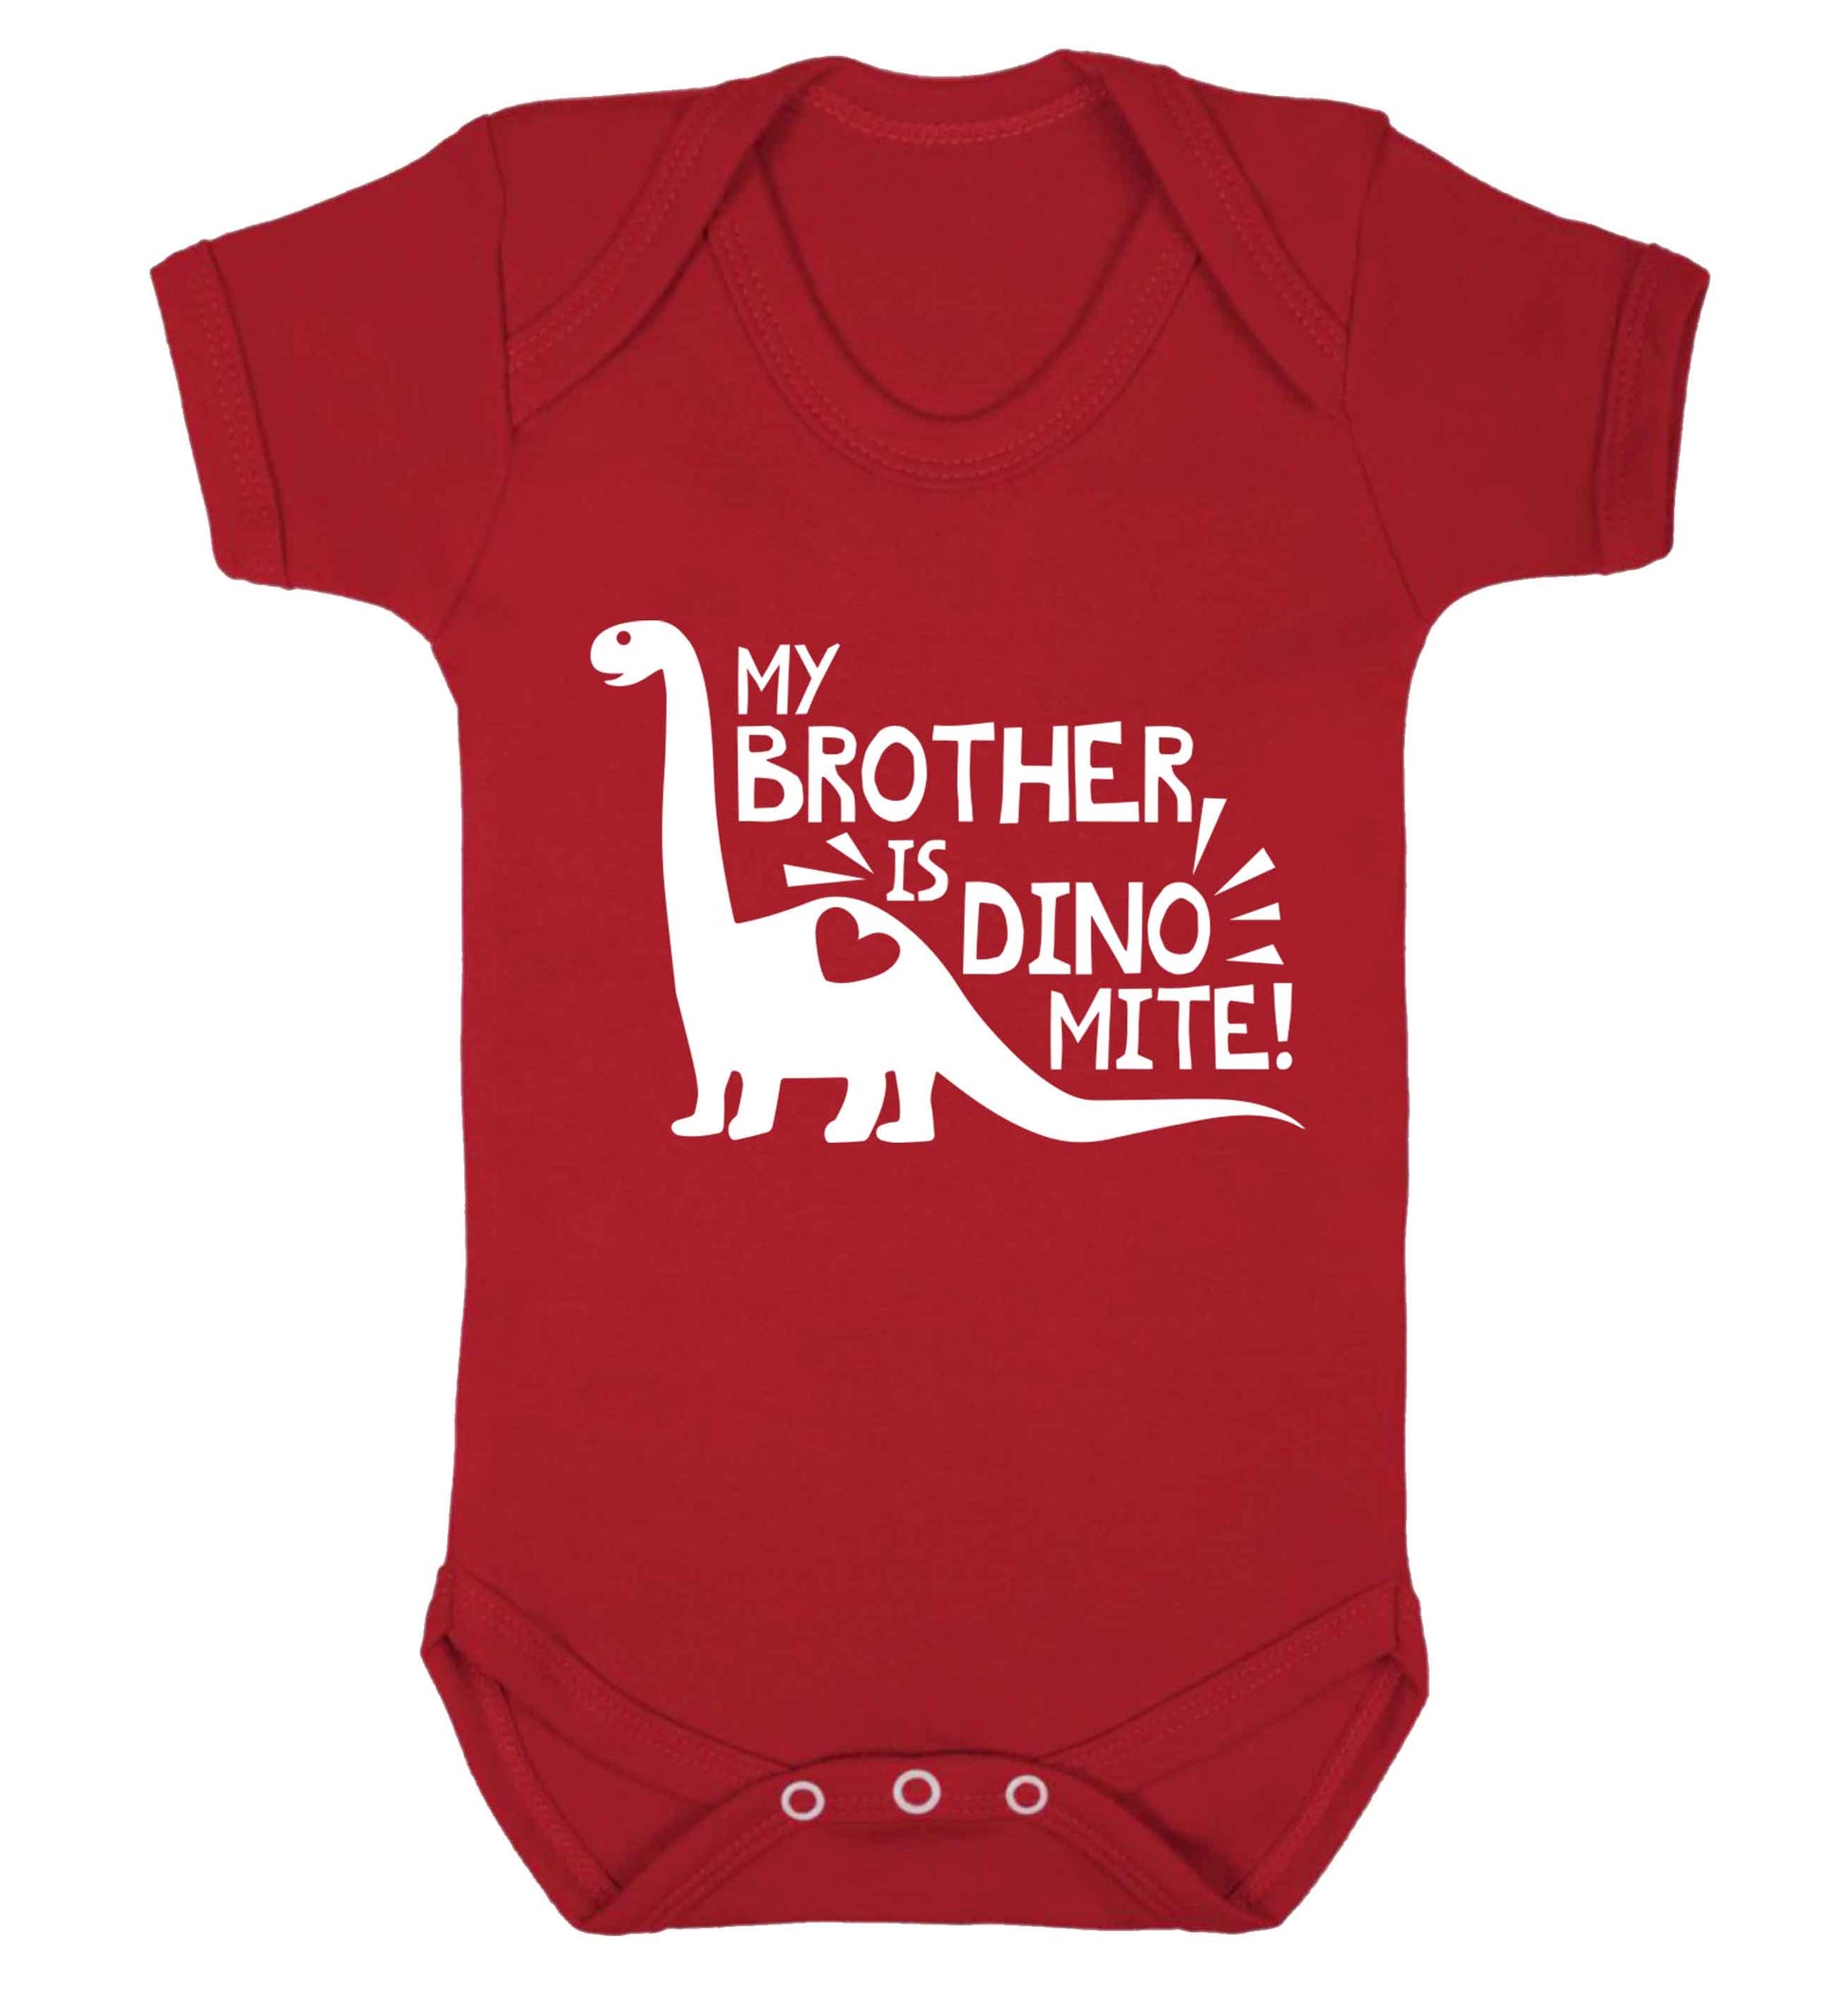 My brother is dinomite! Baby Vest red 18-24 months